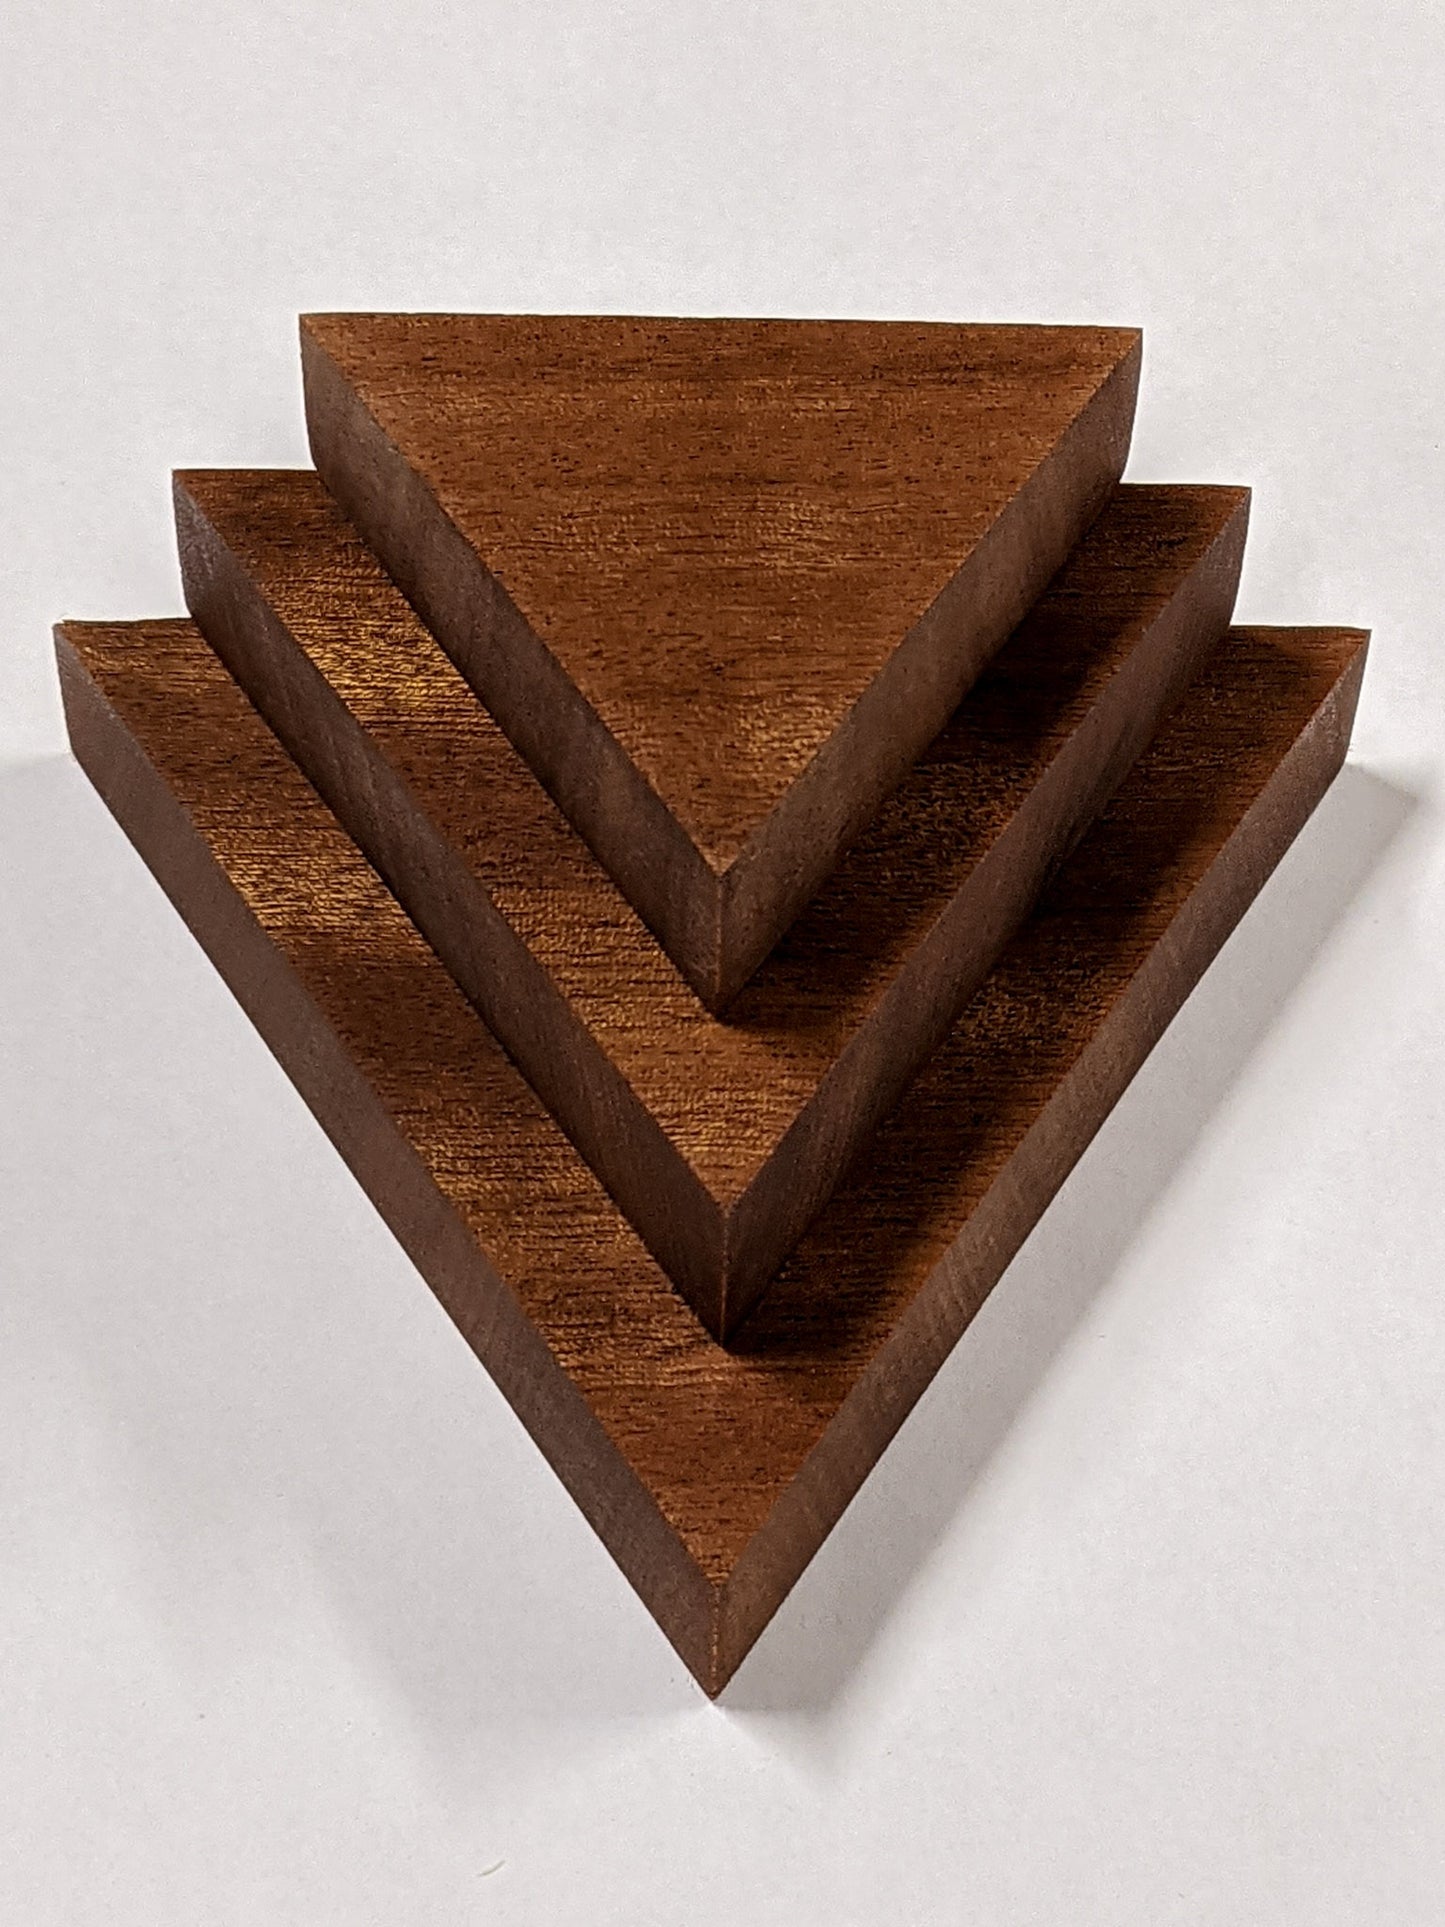 Three triangle floating shelves in mahogany sit on top of the other in varying sizes from largest to smallest.